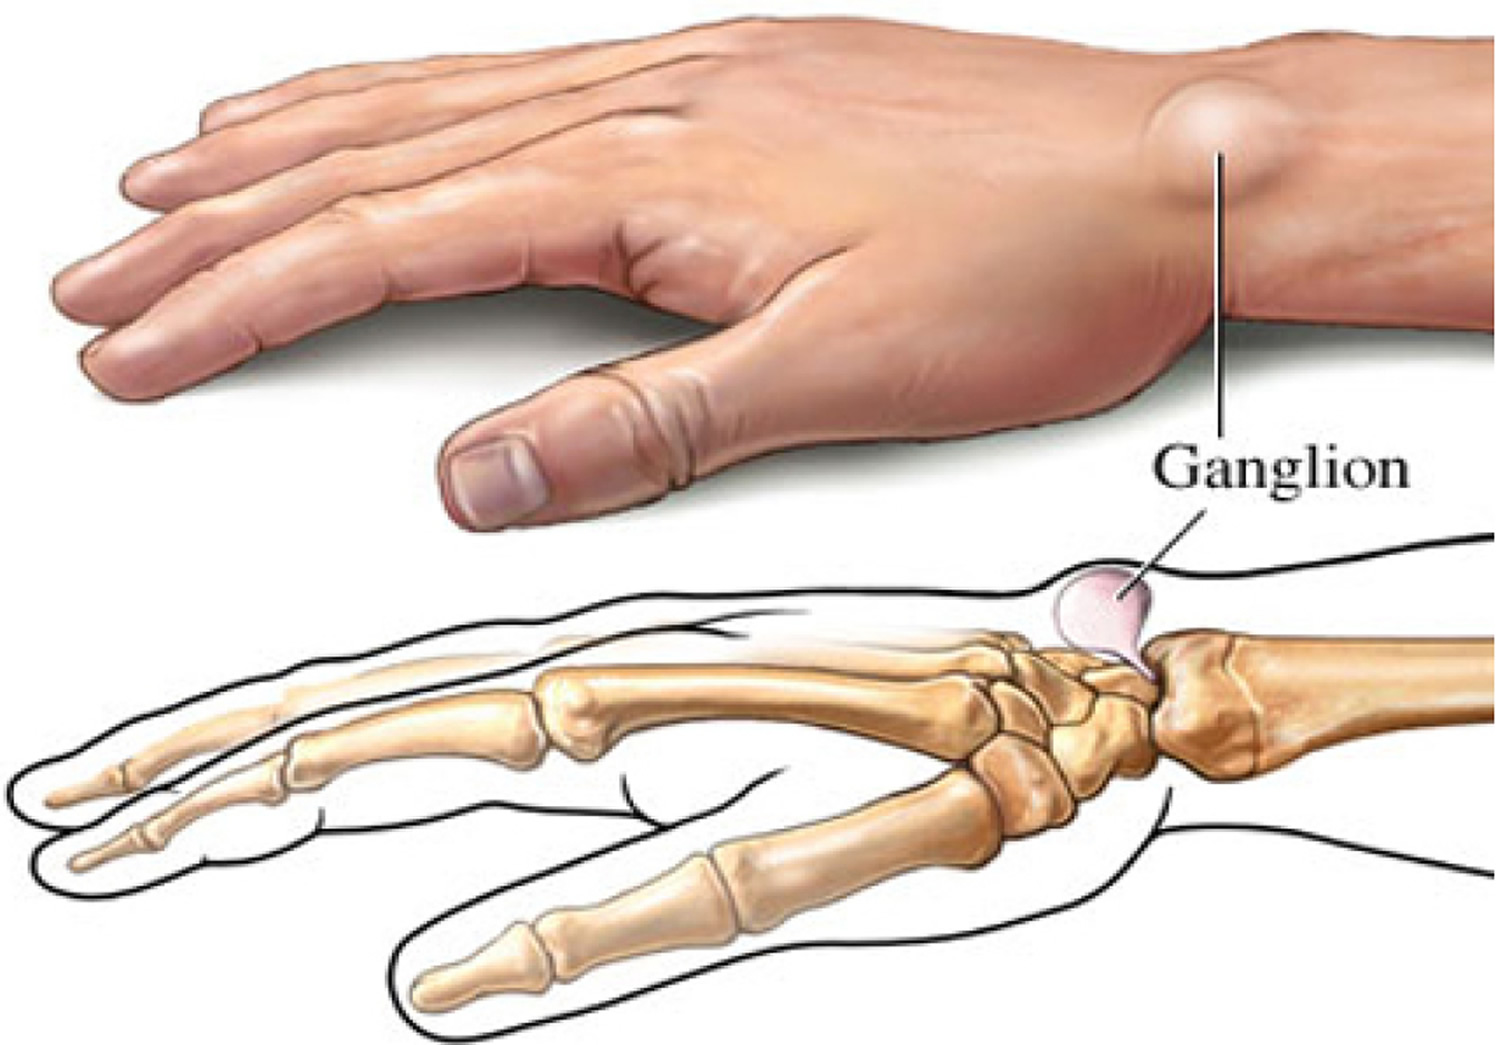 Ganglion Cyst Causes And Management Of Painful Ganglion Cysts